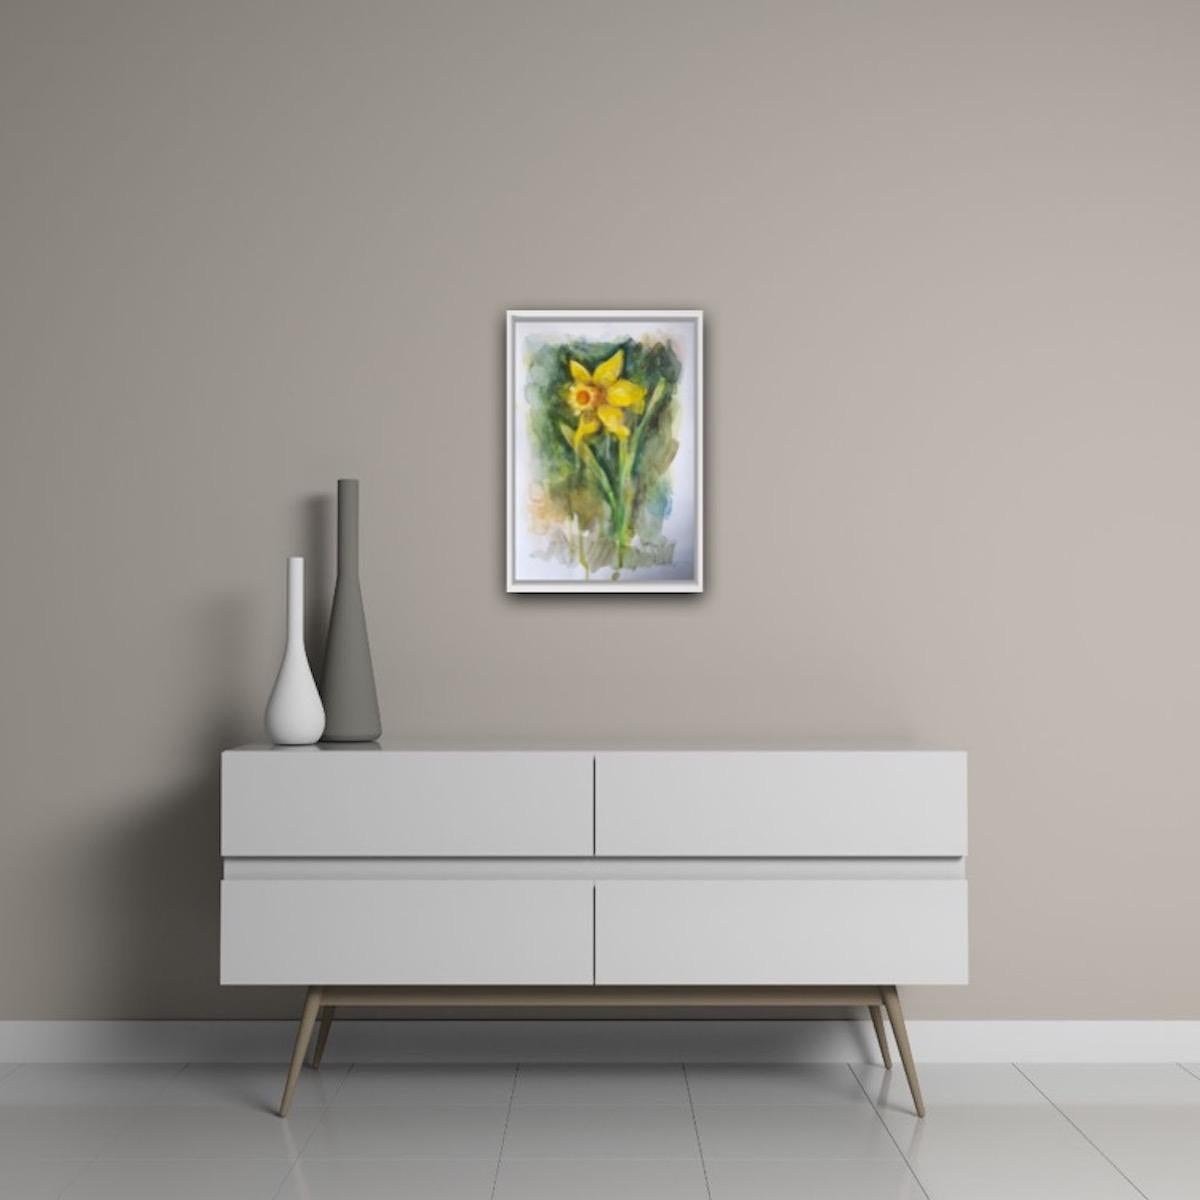 Daffodil by Gavin Dobson, contemporary art, original painting, watercolour paint 9